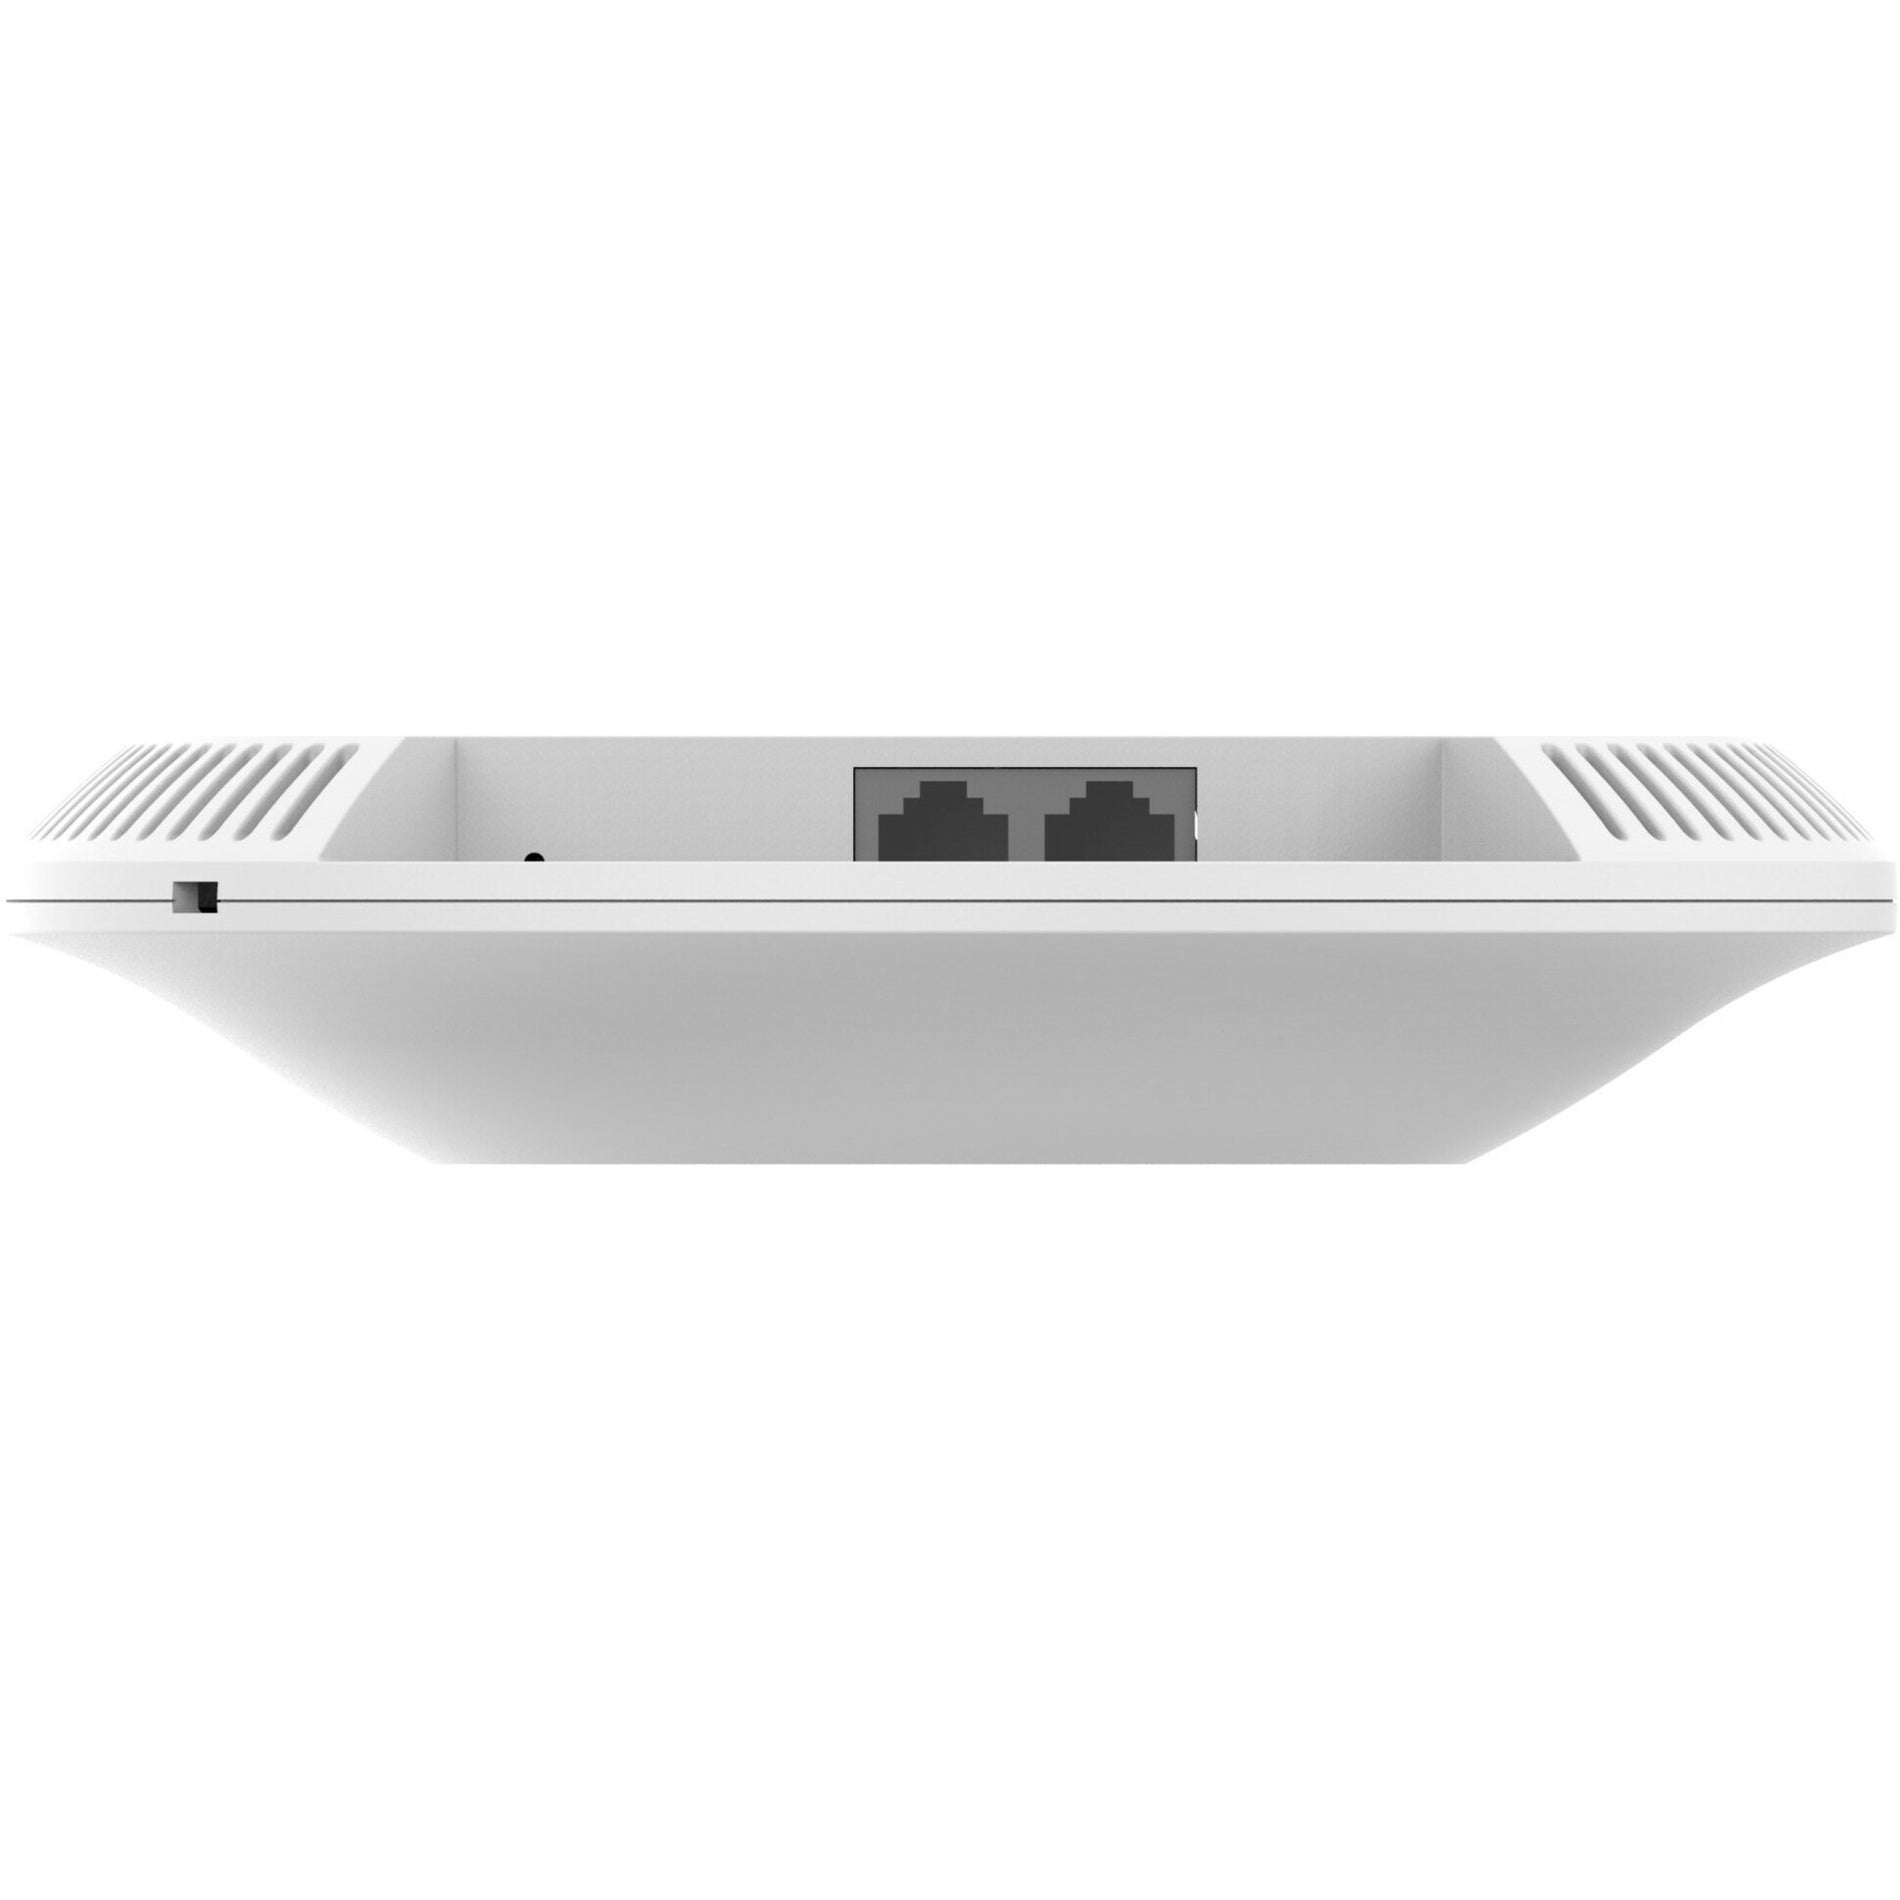 Grandstream GWN7660 802.11ax 2x2:2 Wi-Fi 6 Access Point, Dual-Band Indoor Wireless Transmission Speed 1.77 Gbit/s